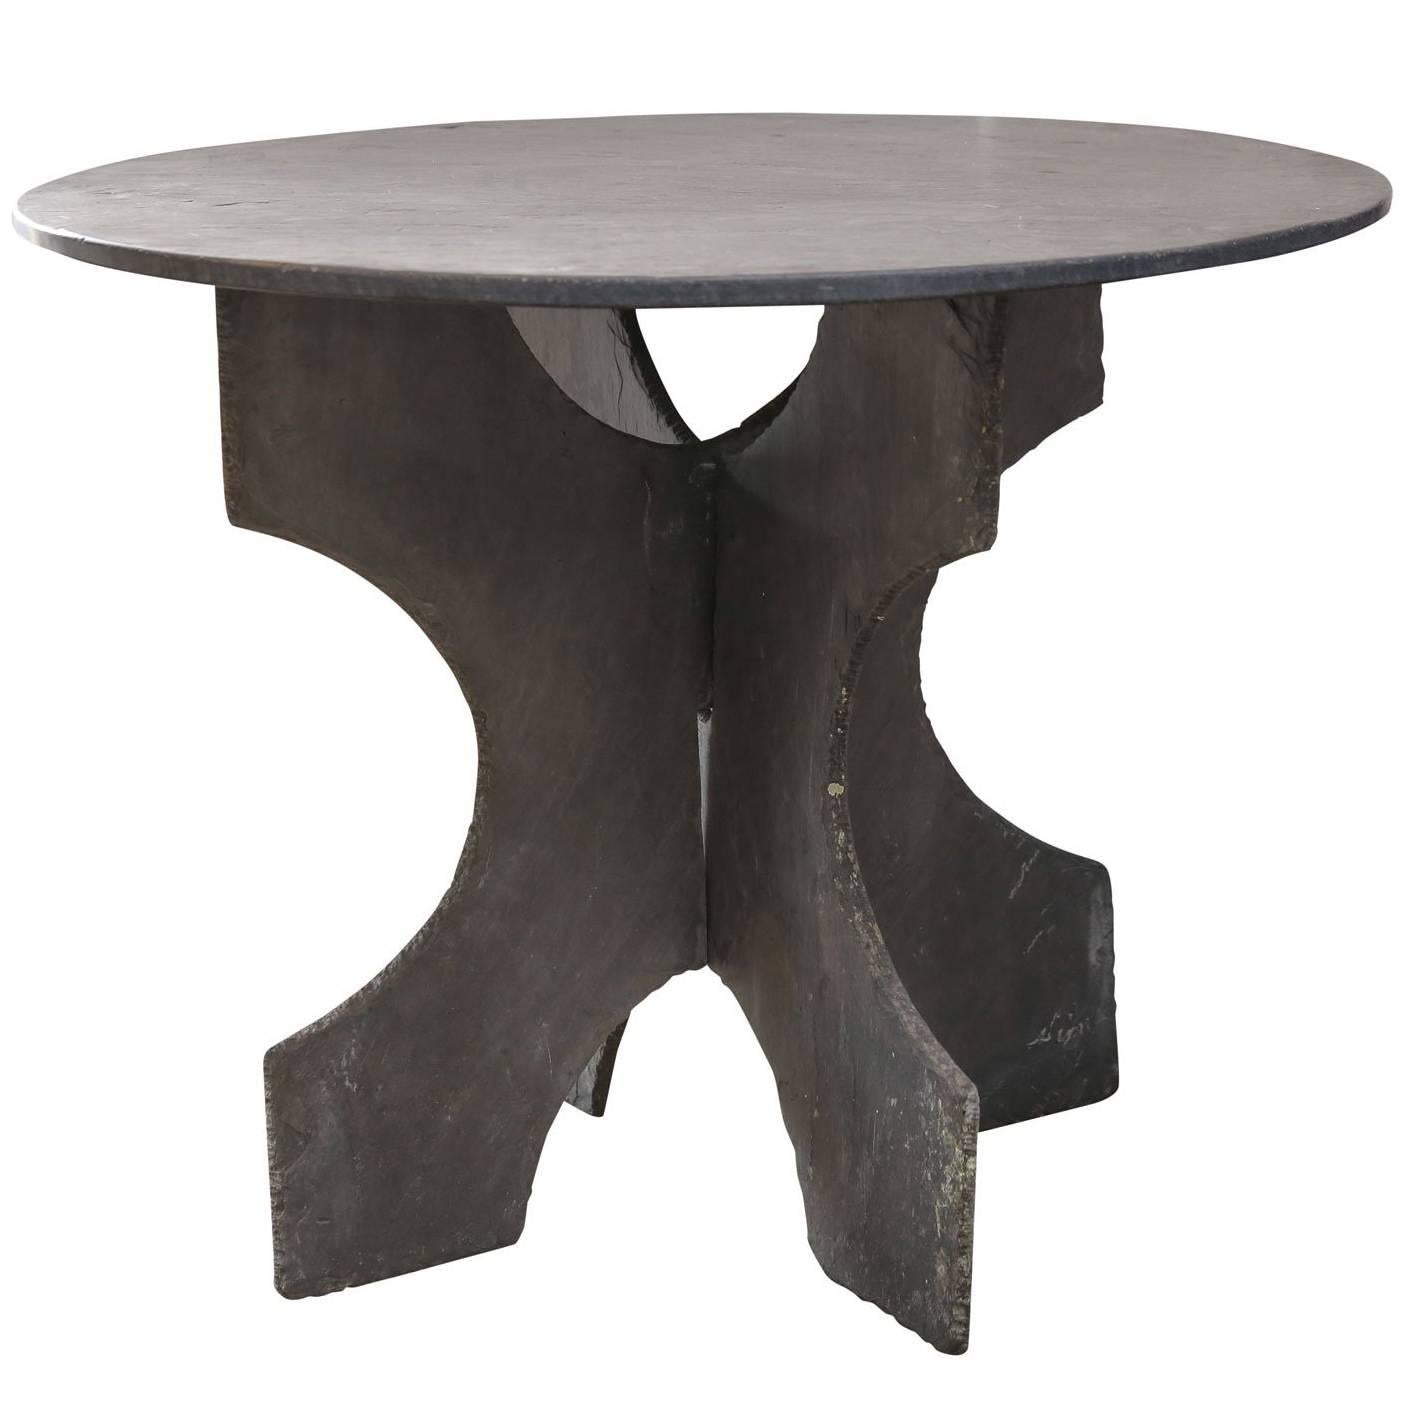 French Table D'ardoise